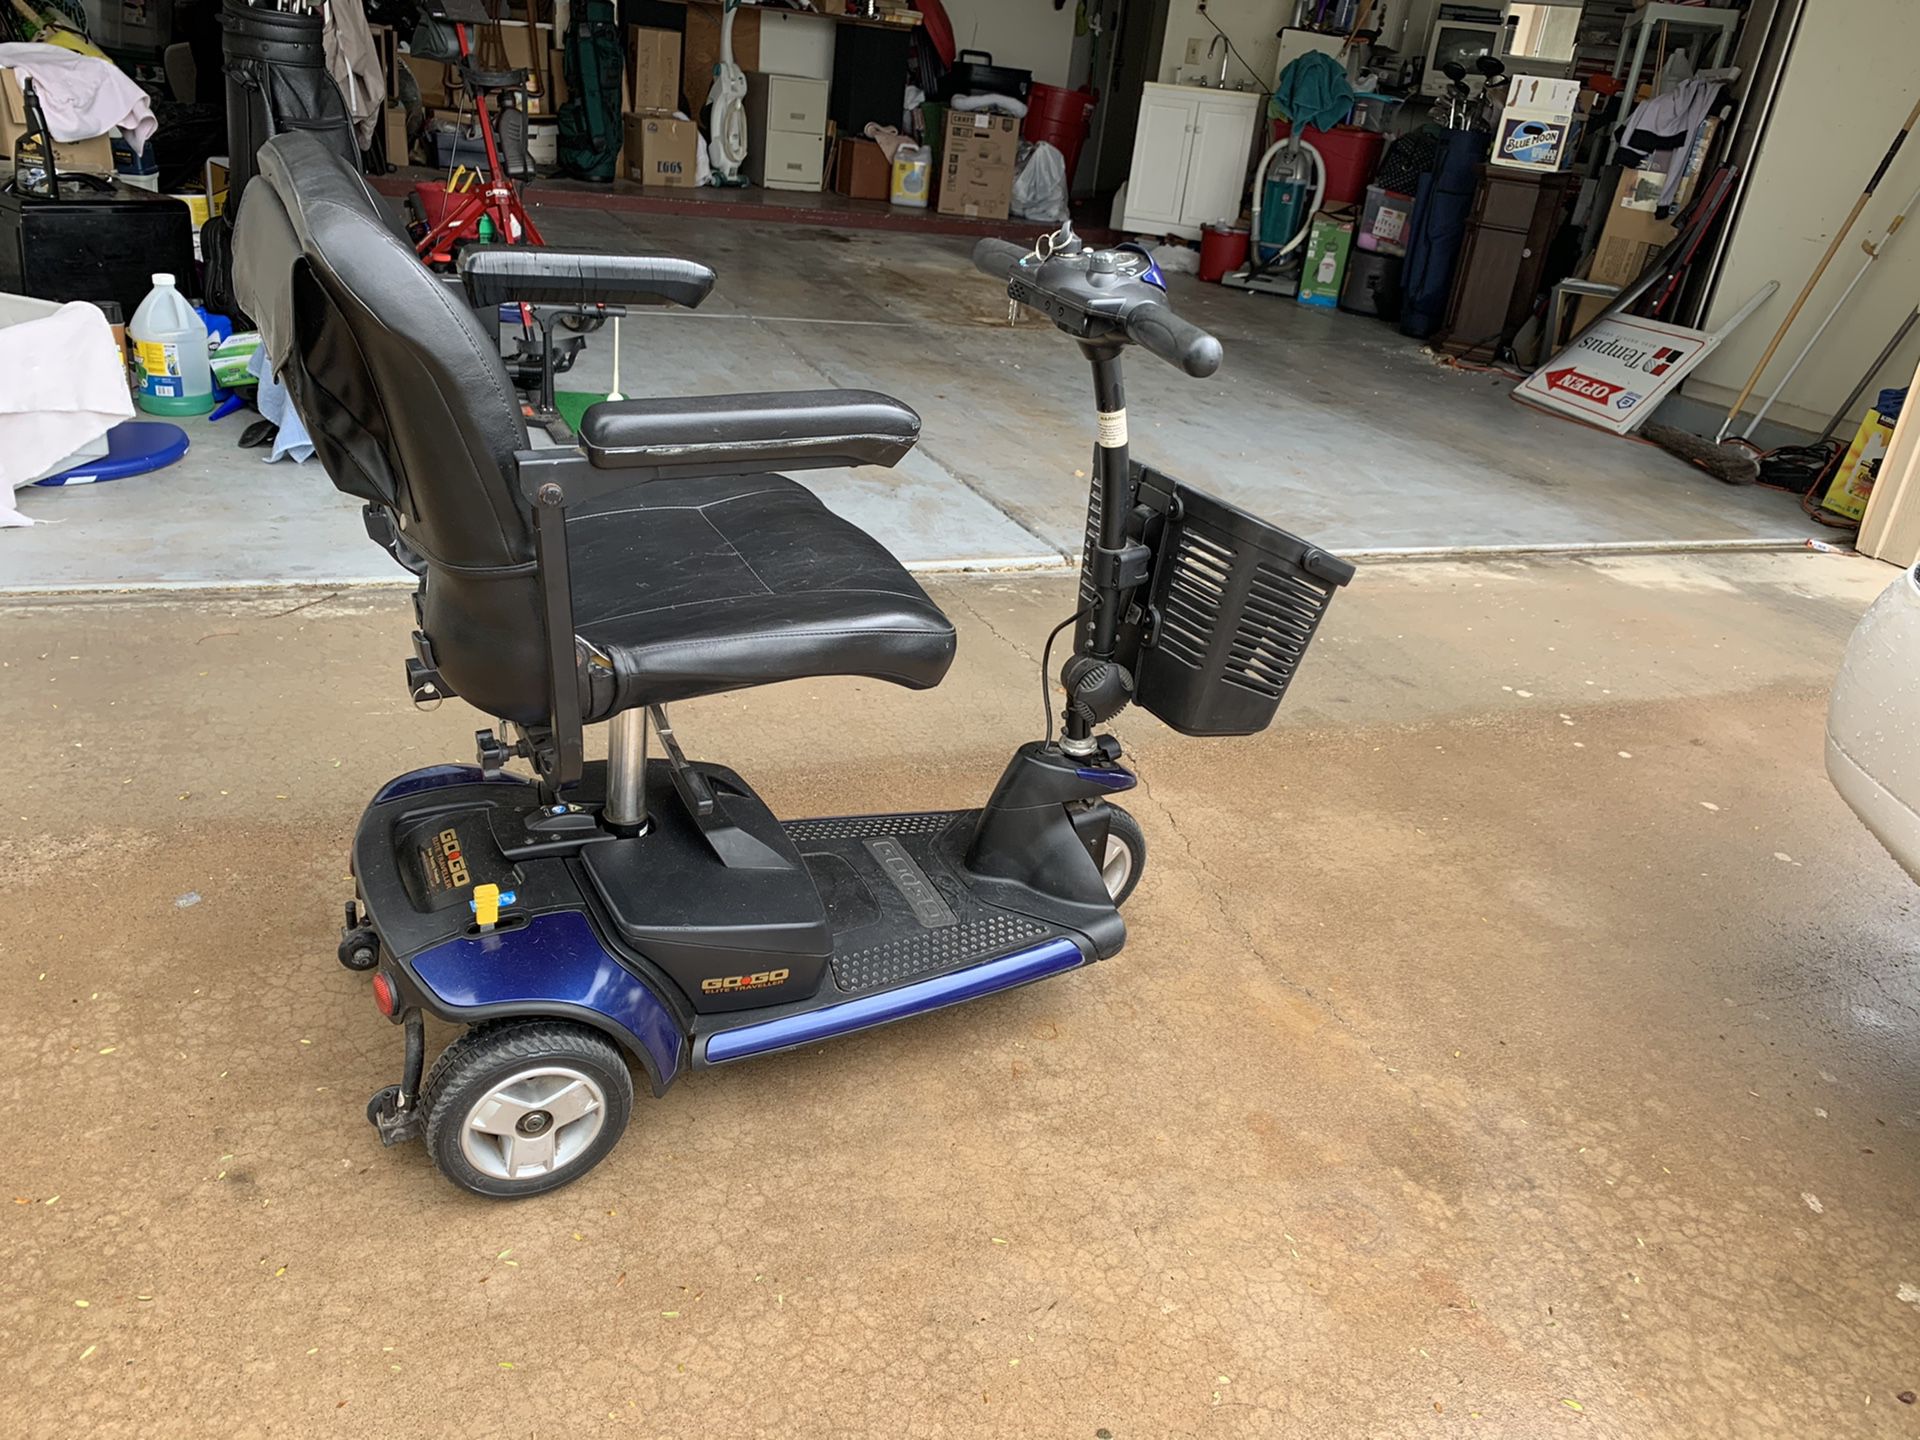 Go-Go elite mobility scooter. Breaks down into 3pieces for transport. It can be blue red or gray. I have all the parts to change the color plus 2 s